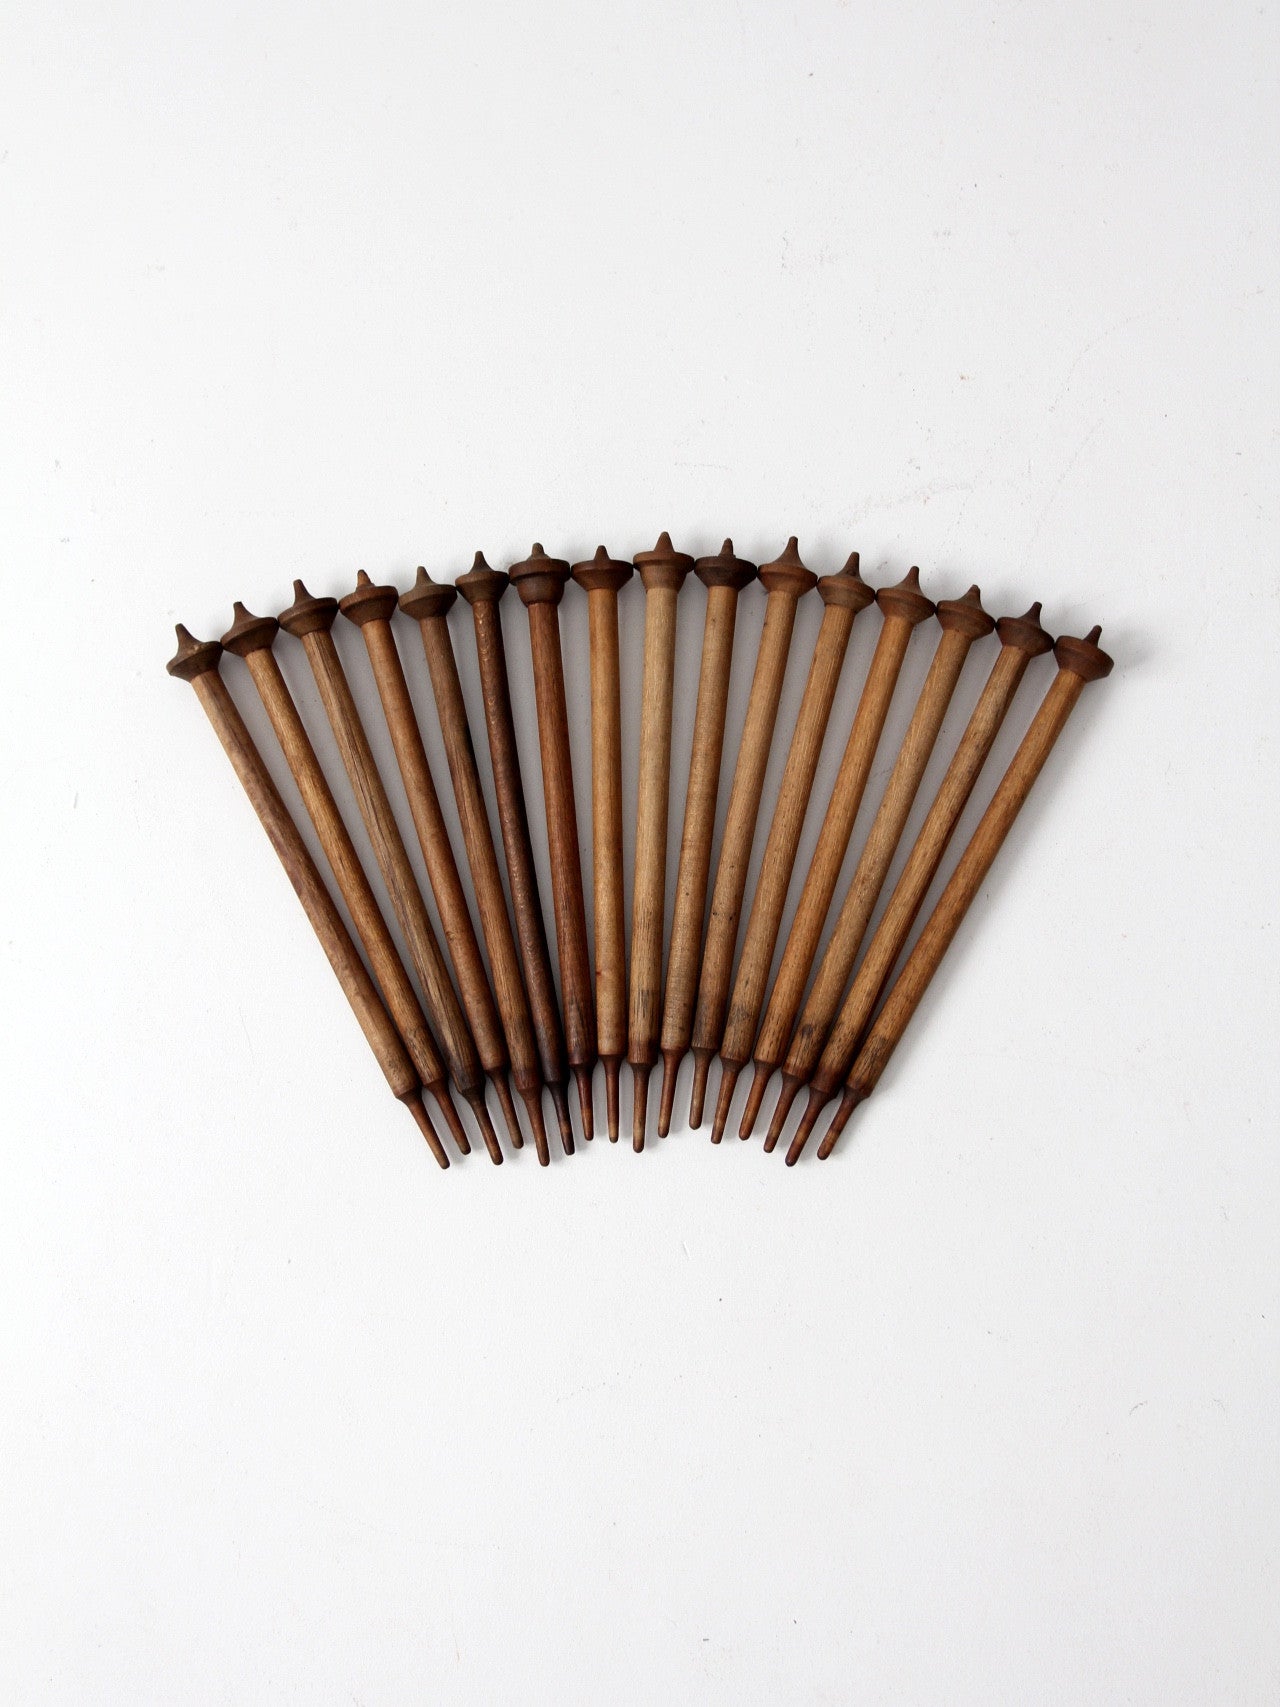 antique wood spinning needle collection